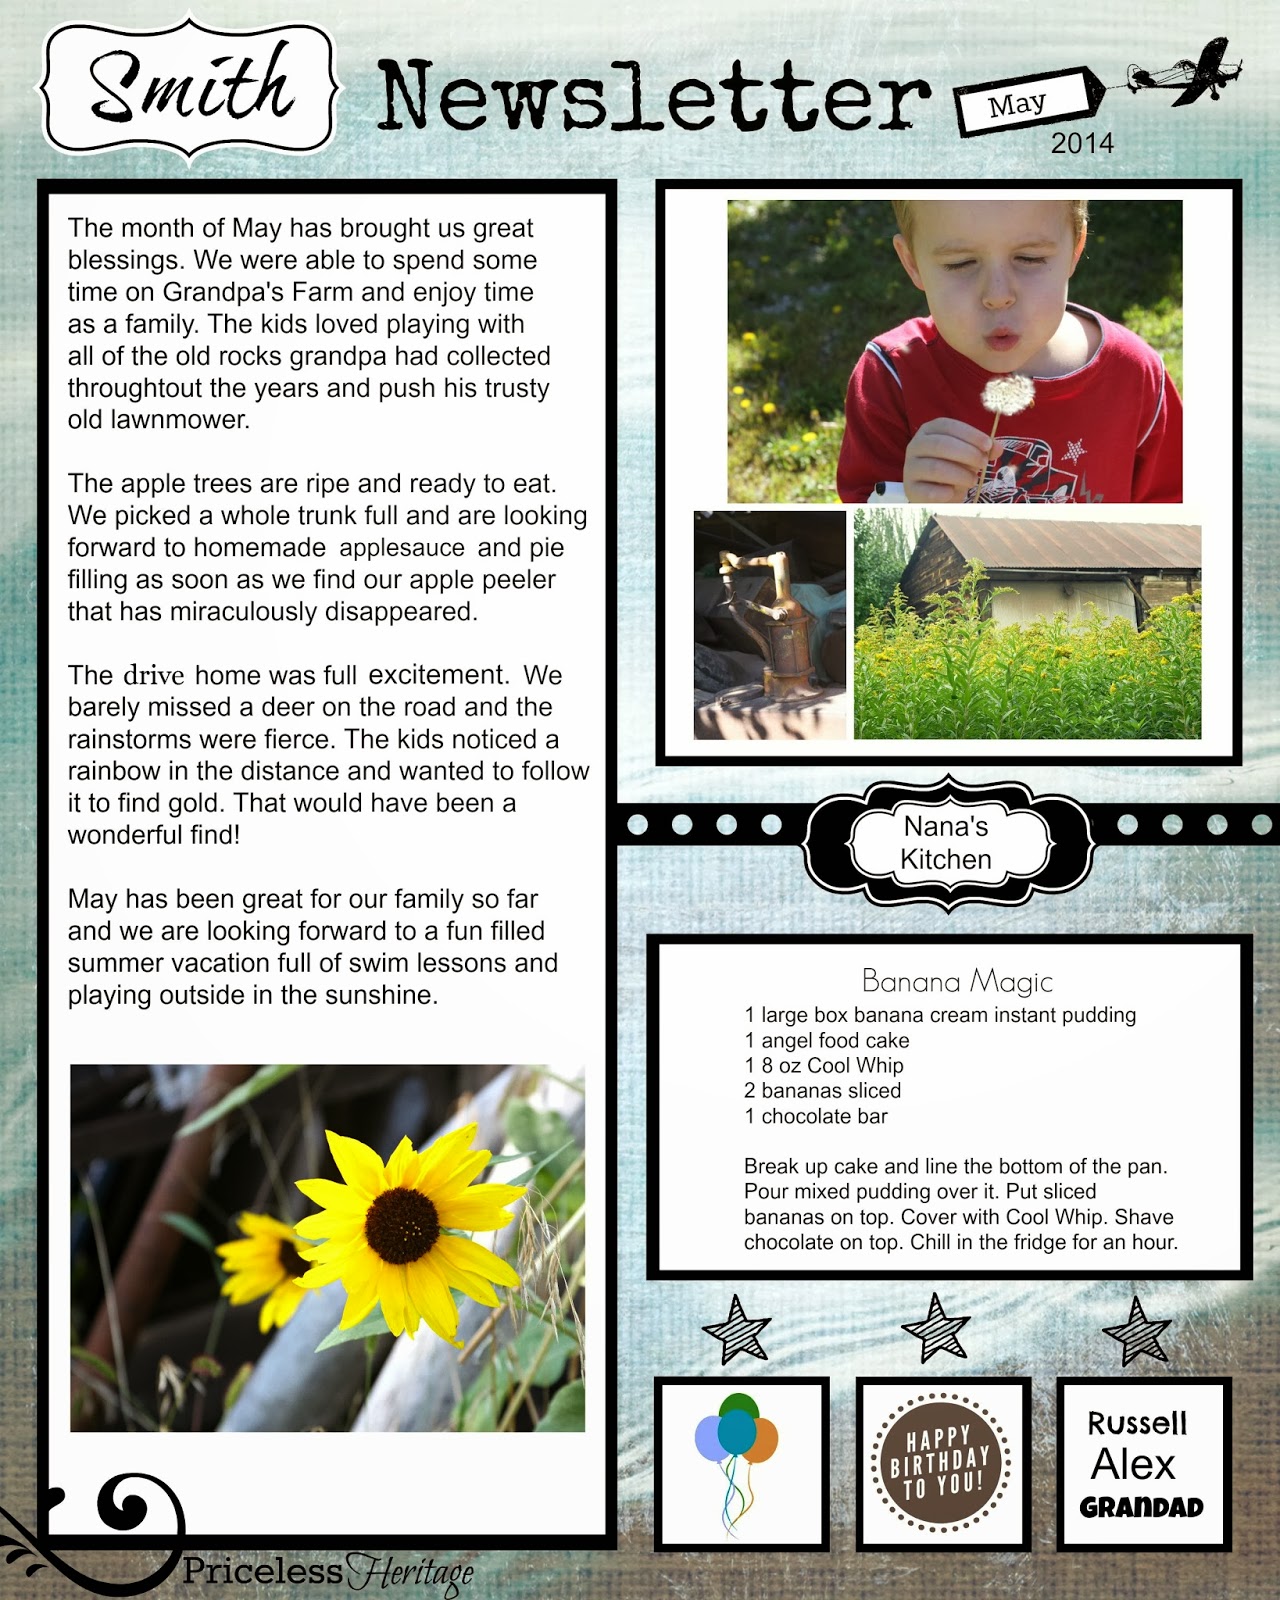 Family Newsletter example using PicMonkey to fill in the space}